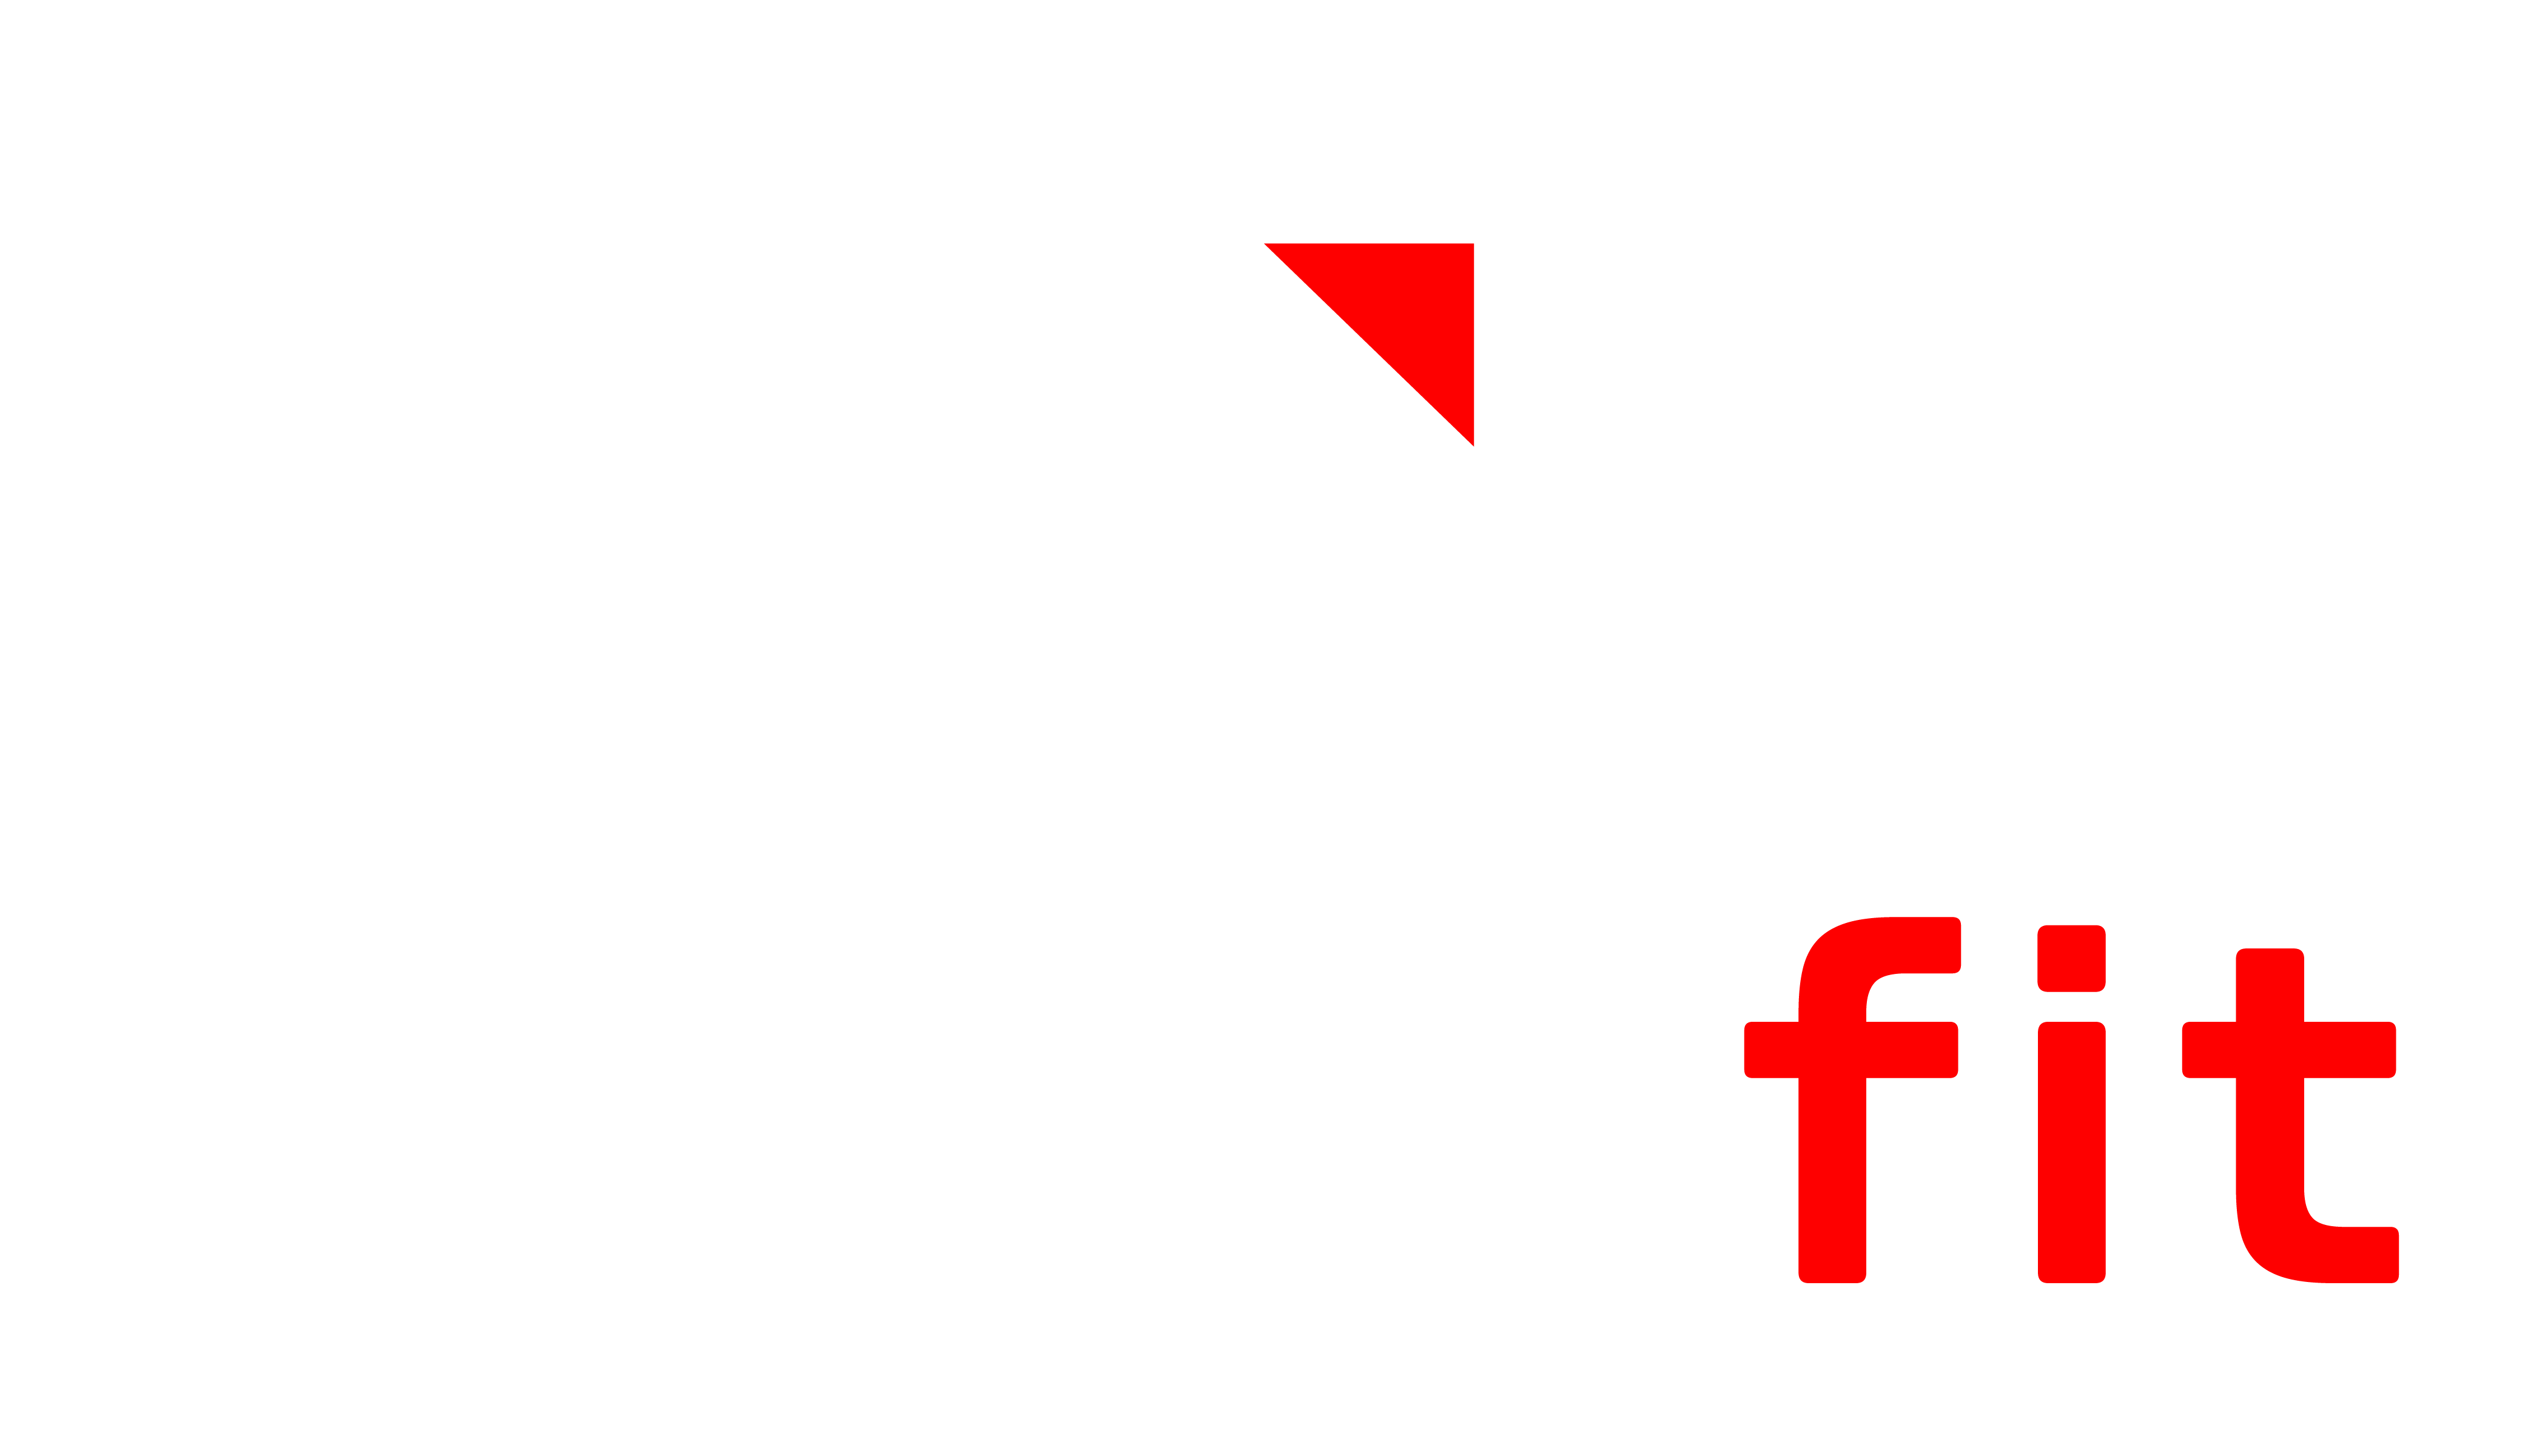 Nervfit - Every Step Matters!